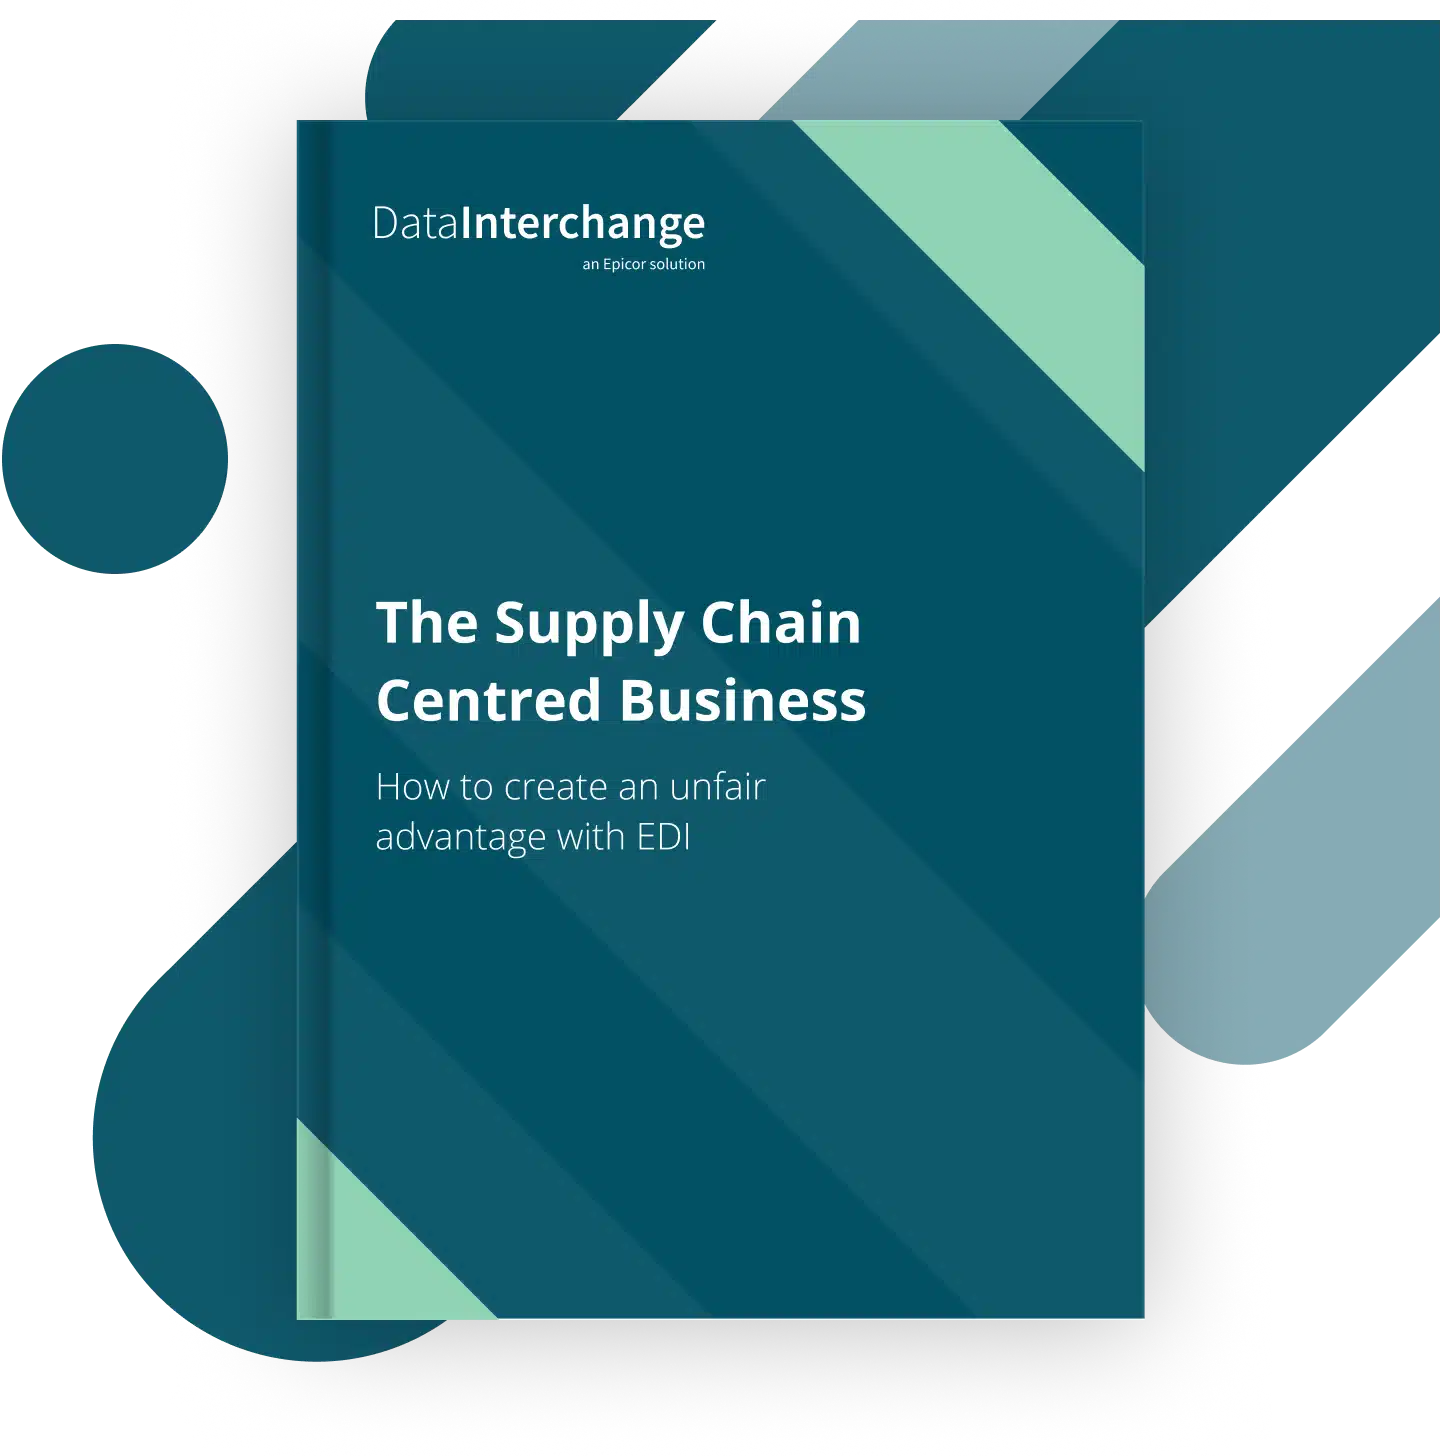 The Supply Chain Centred Business